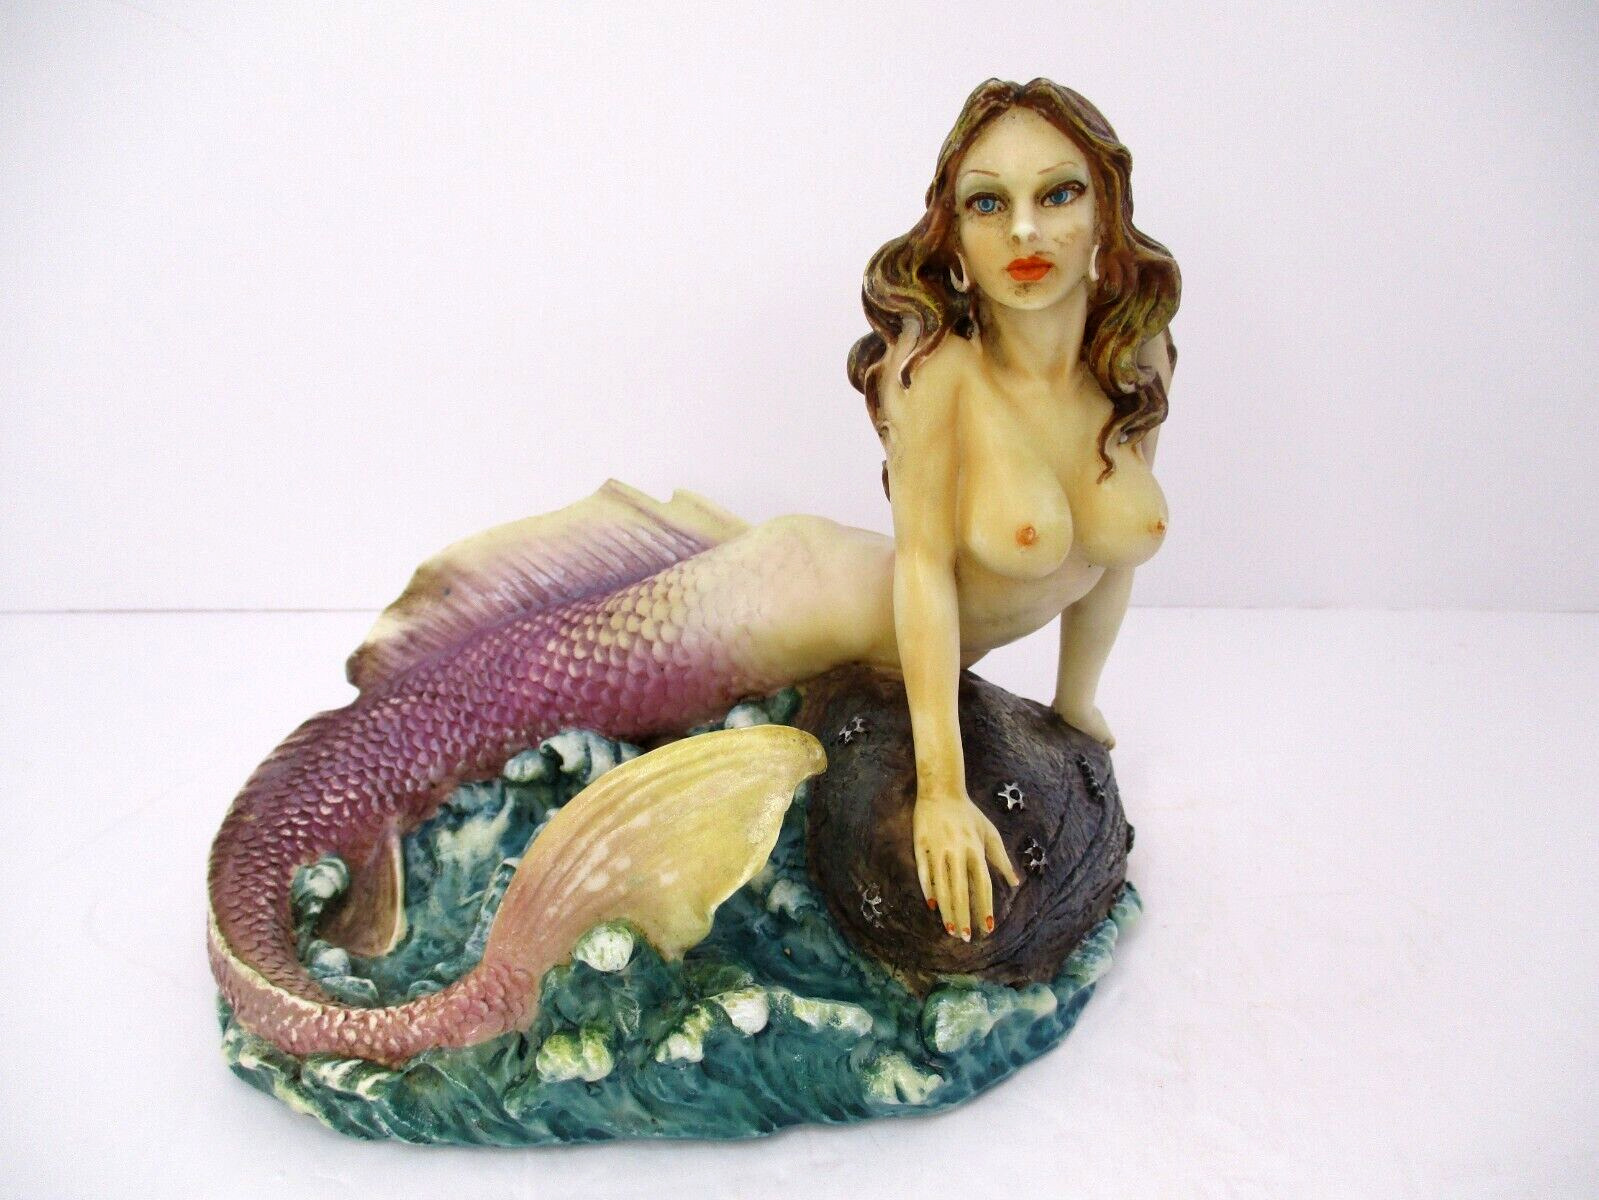 Vintage Mermaid Sitting on a Rock in the Ocean by Summitt Collection